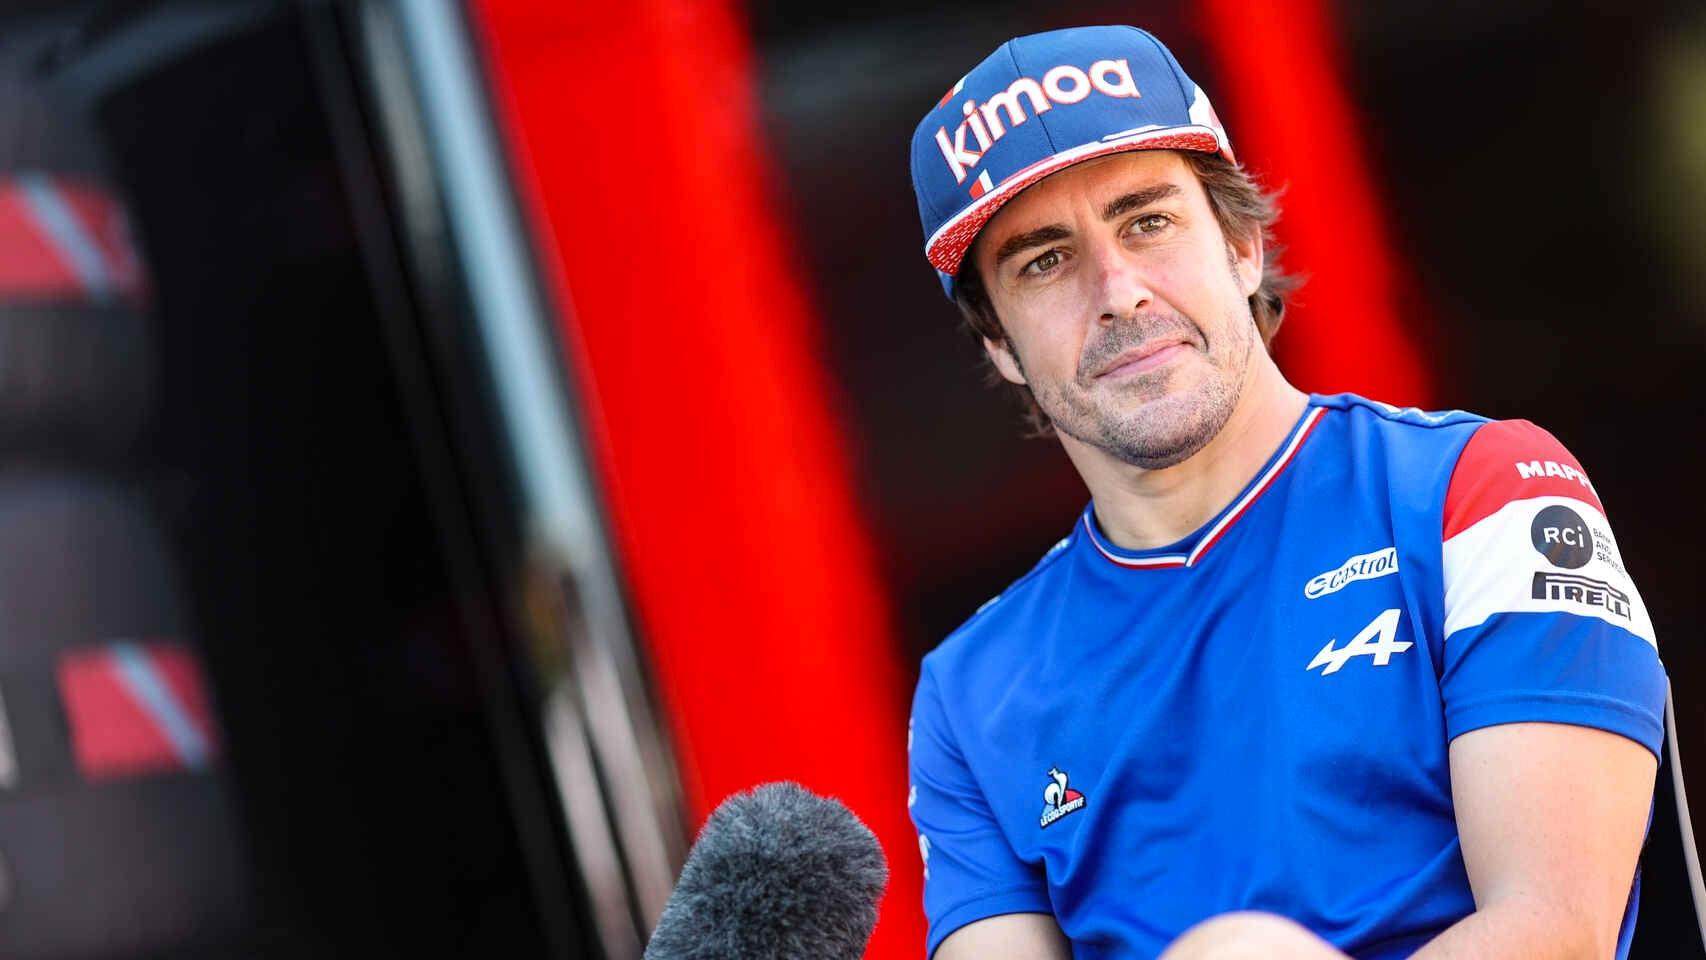 Fernando Alonso: "We are going to wait until 2022 to hopefully have a new hope"